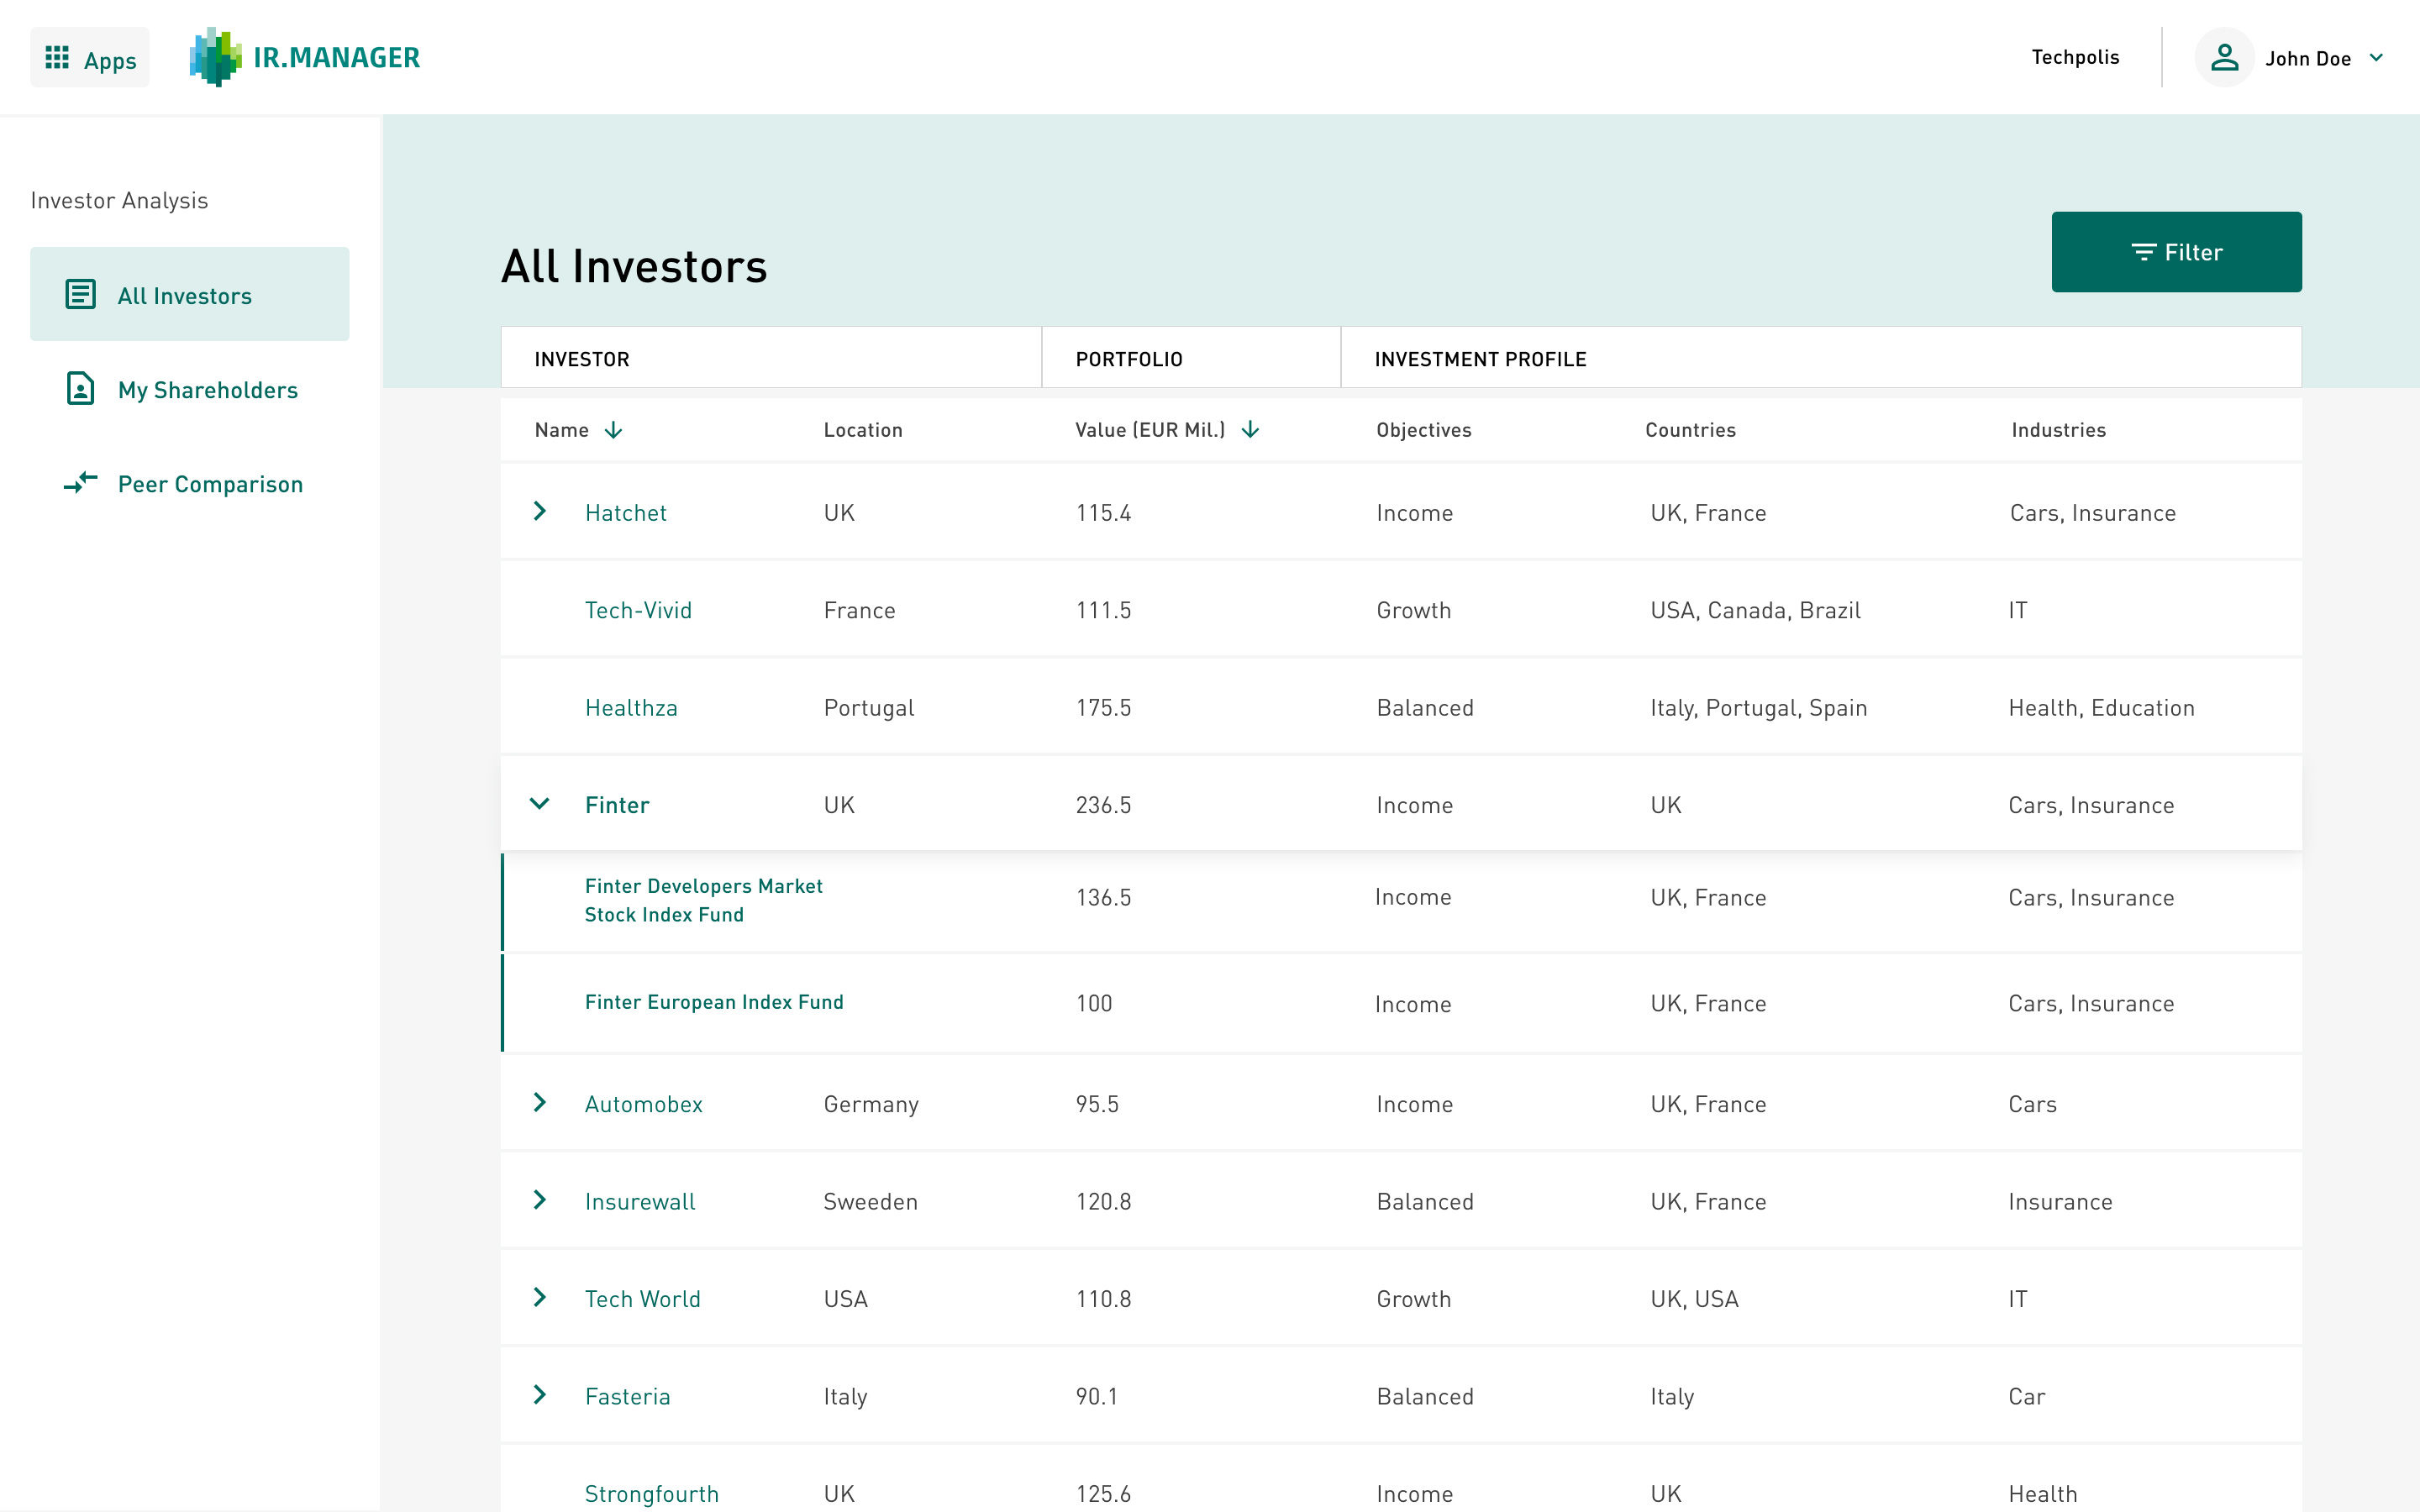 Page containing all the information relating to the investor relations portfolio